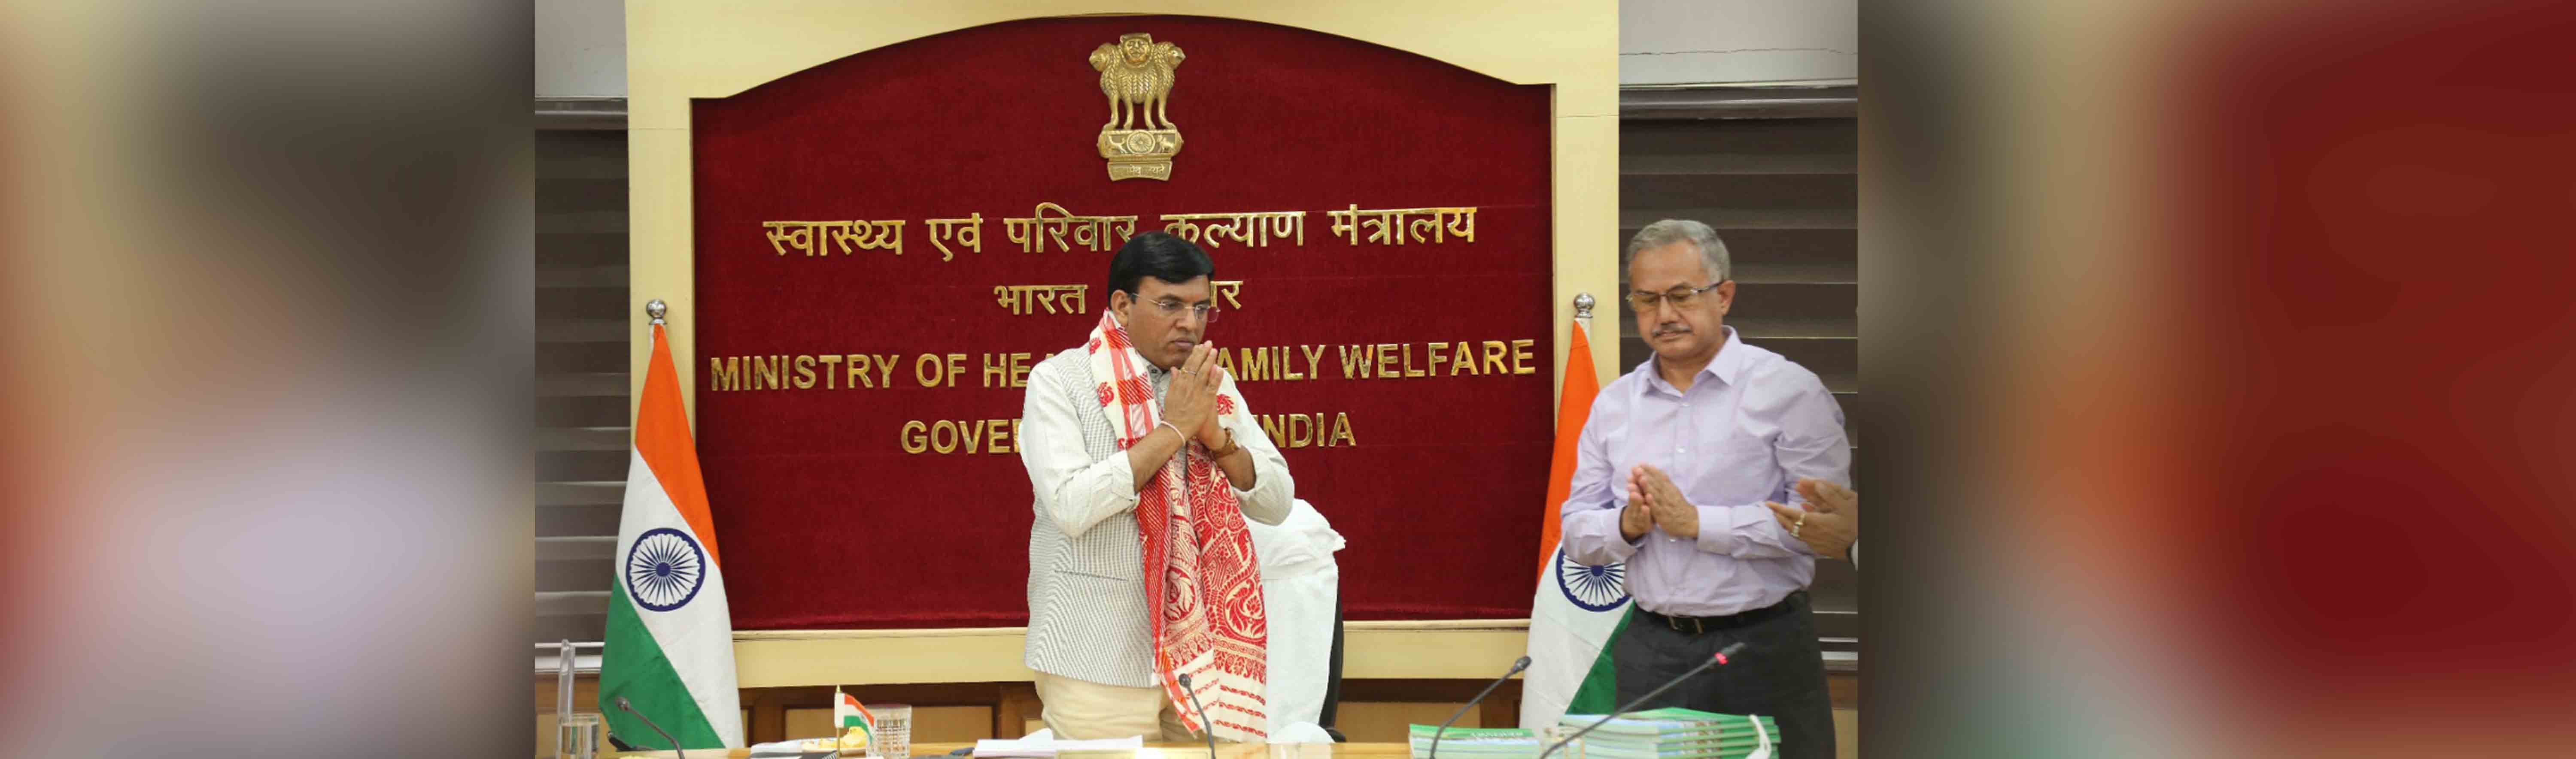 Union Minister for Health & Family Welfare of India